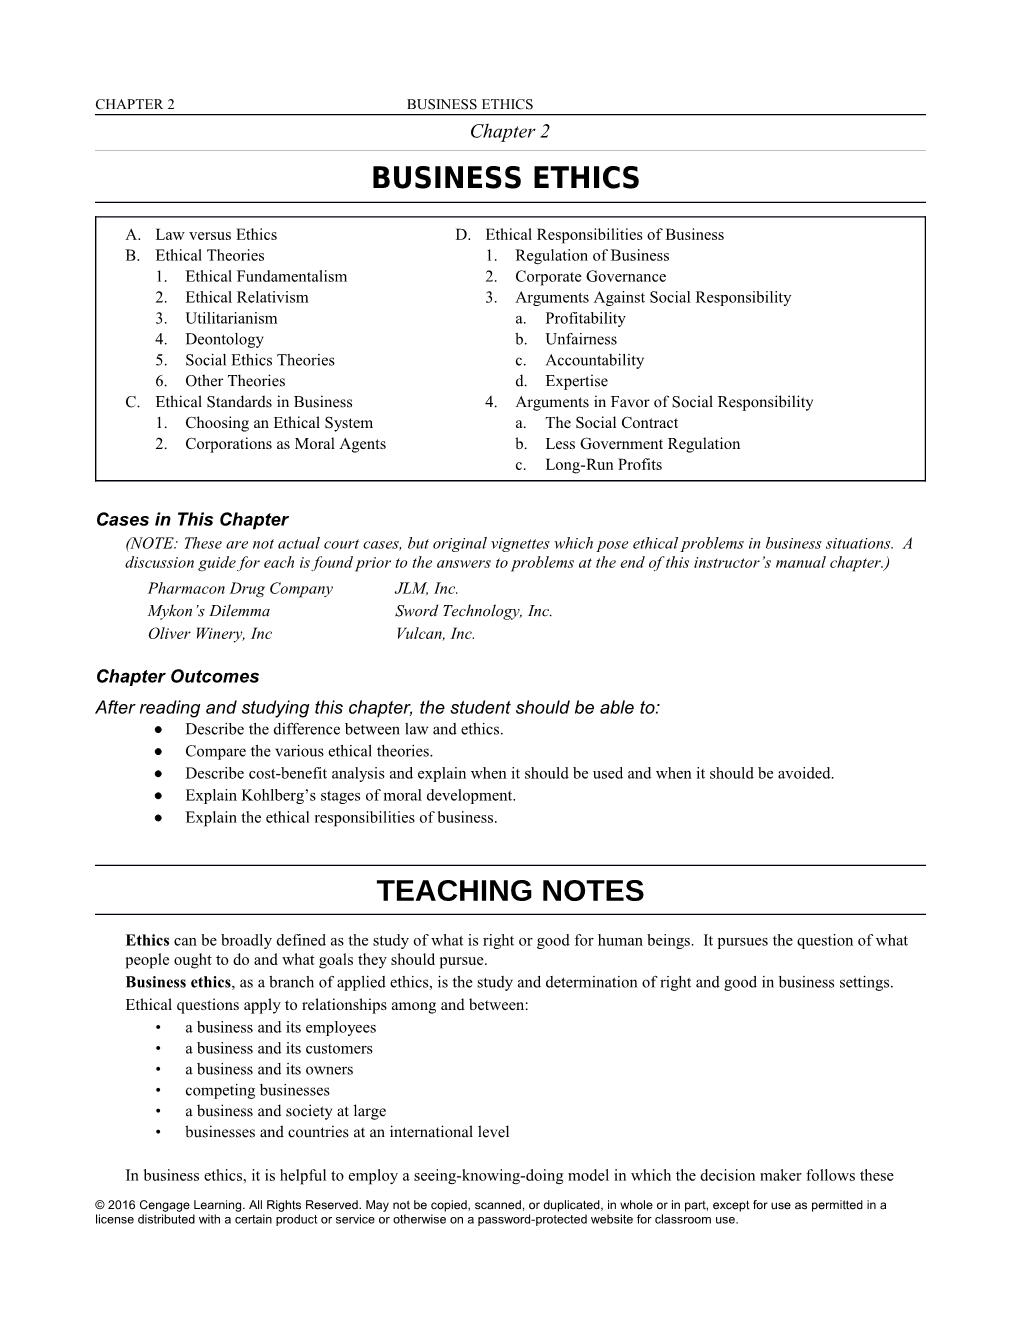 A.Law Versus Ethicsd.Ethical Responsibilities of Business